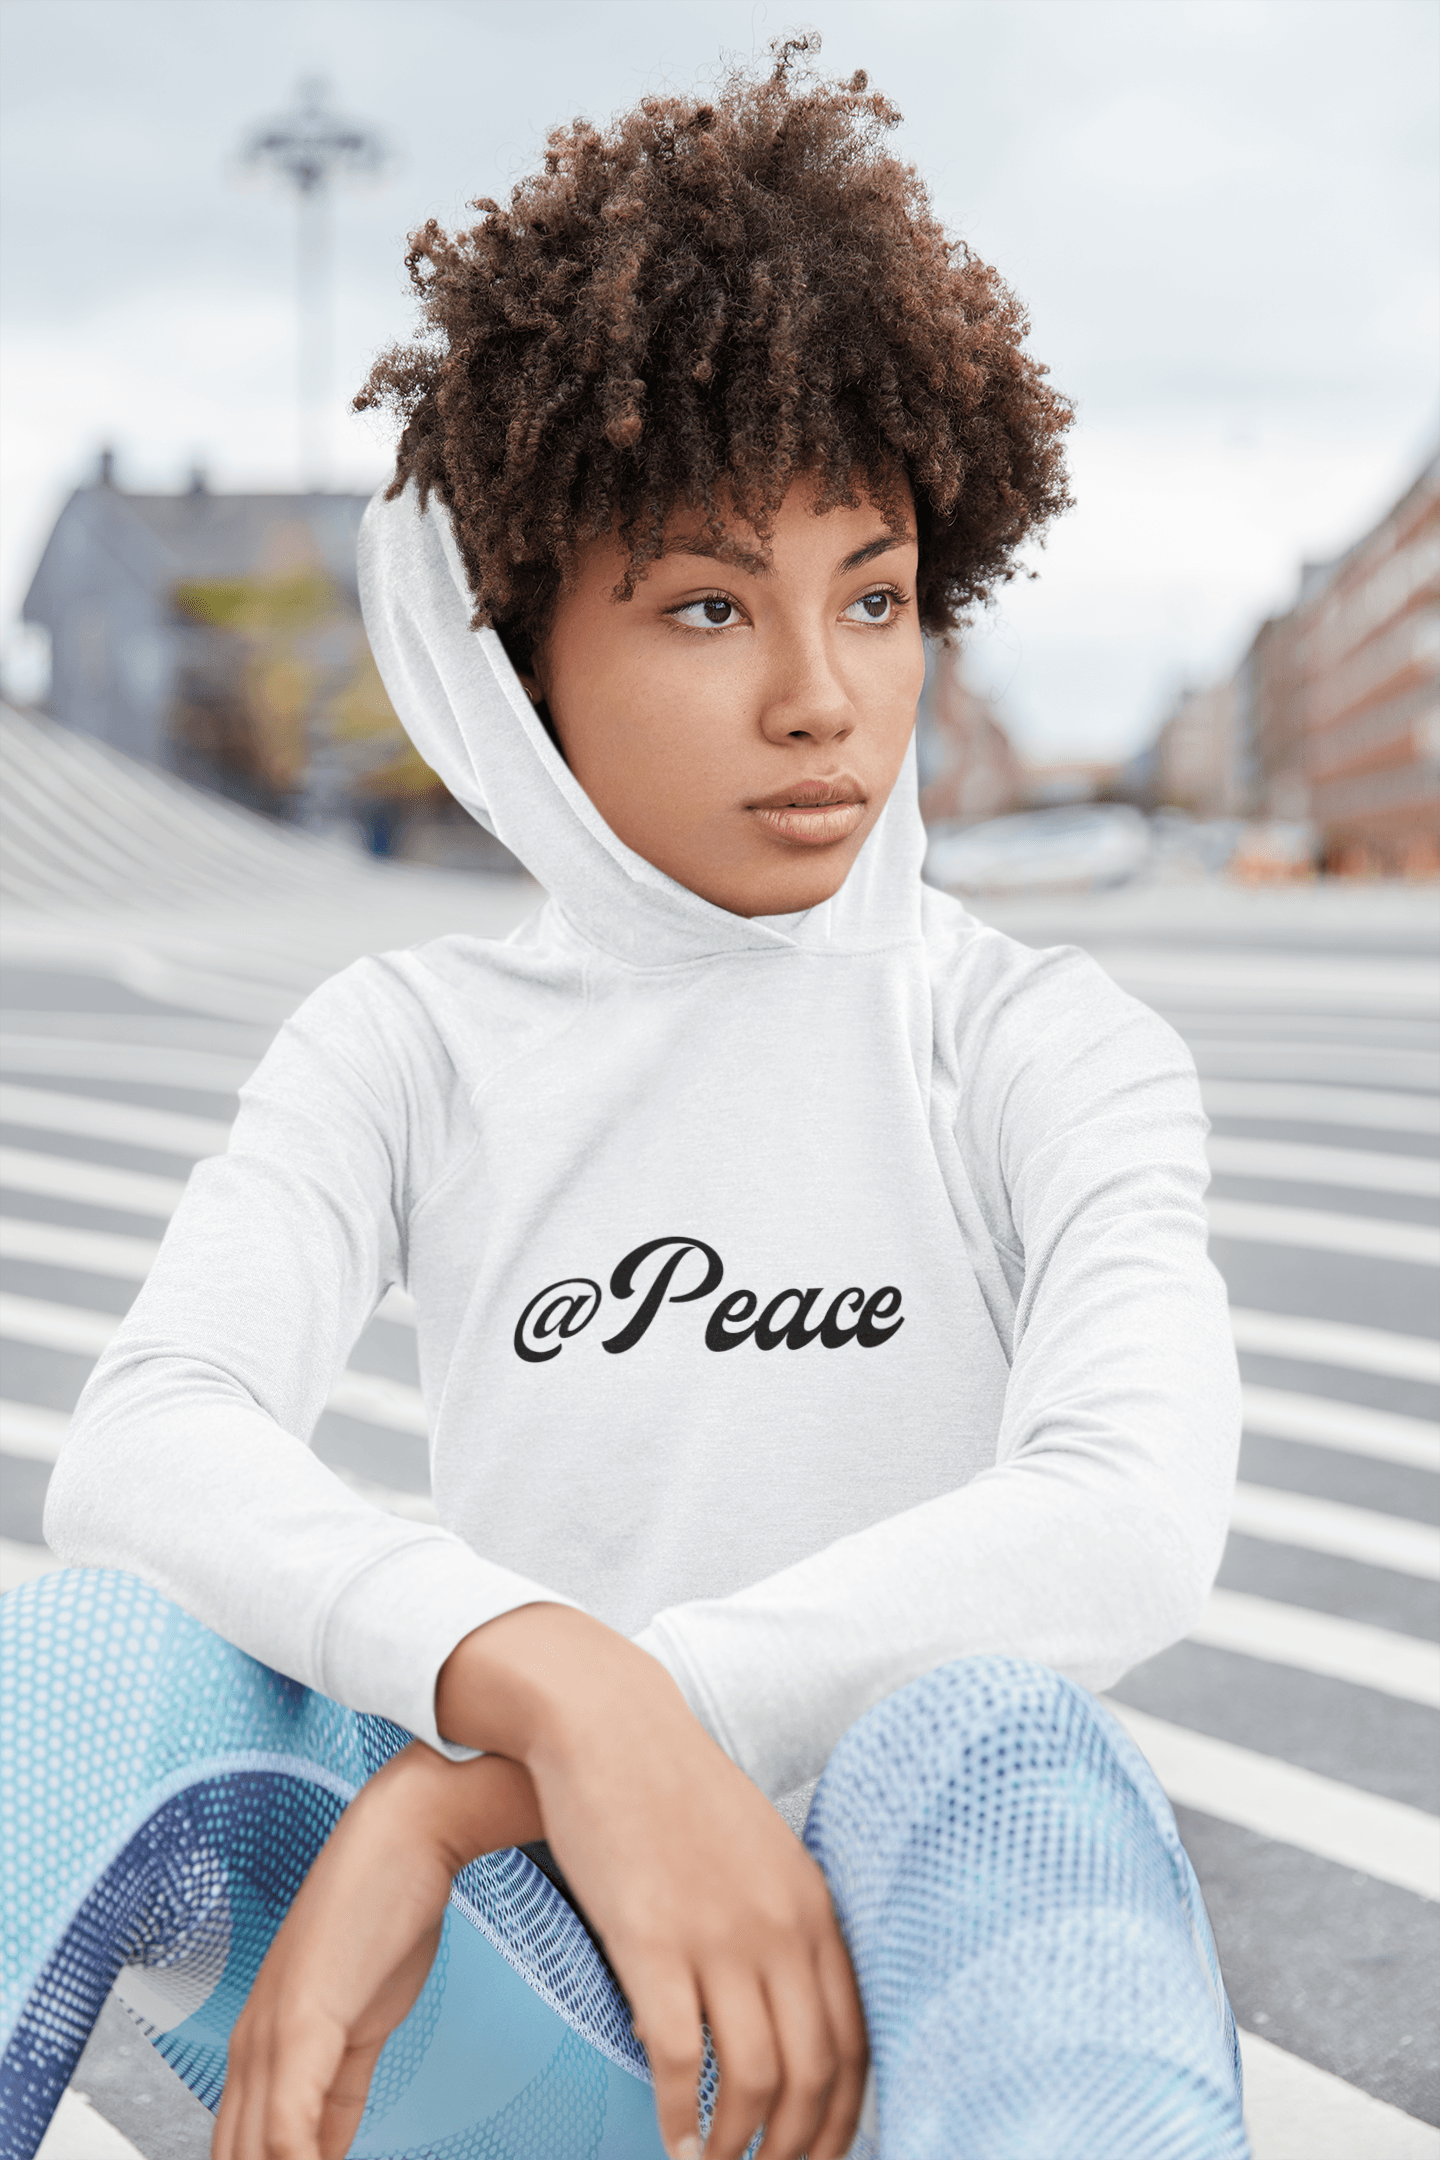 @Peace Hoodie - Women Empowerment T-Shirts & Apparel | CP Designs Unlimited